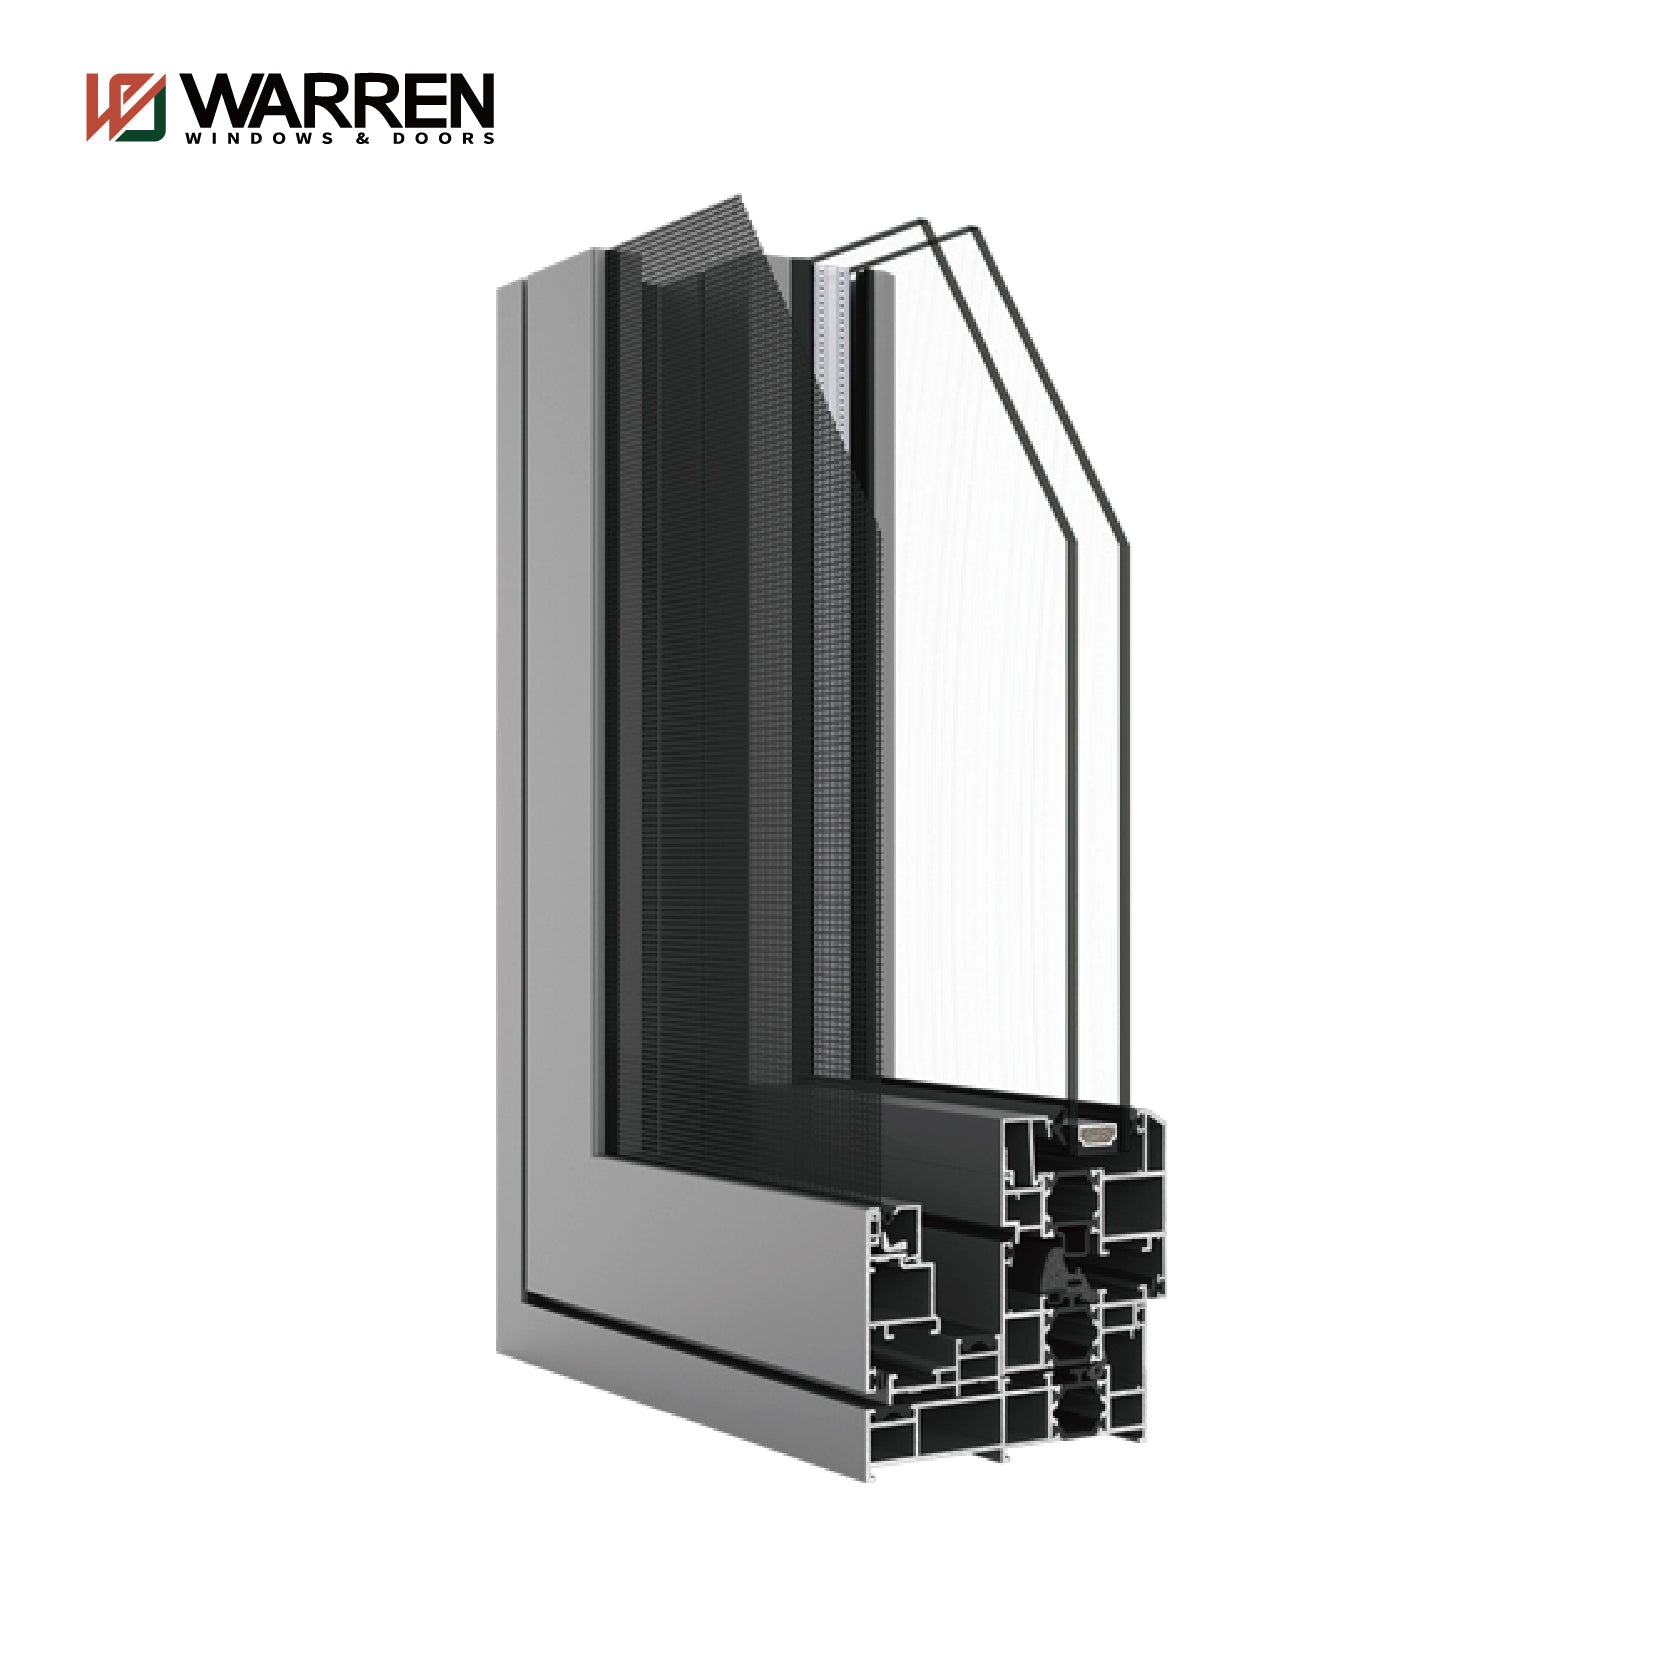 Warren Customized Aluminum Frame Window Screen Integration Patio Window Available In All Rooms